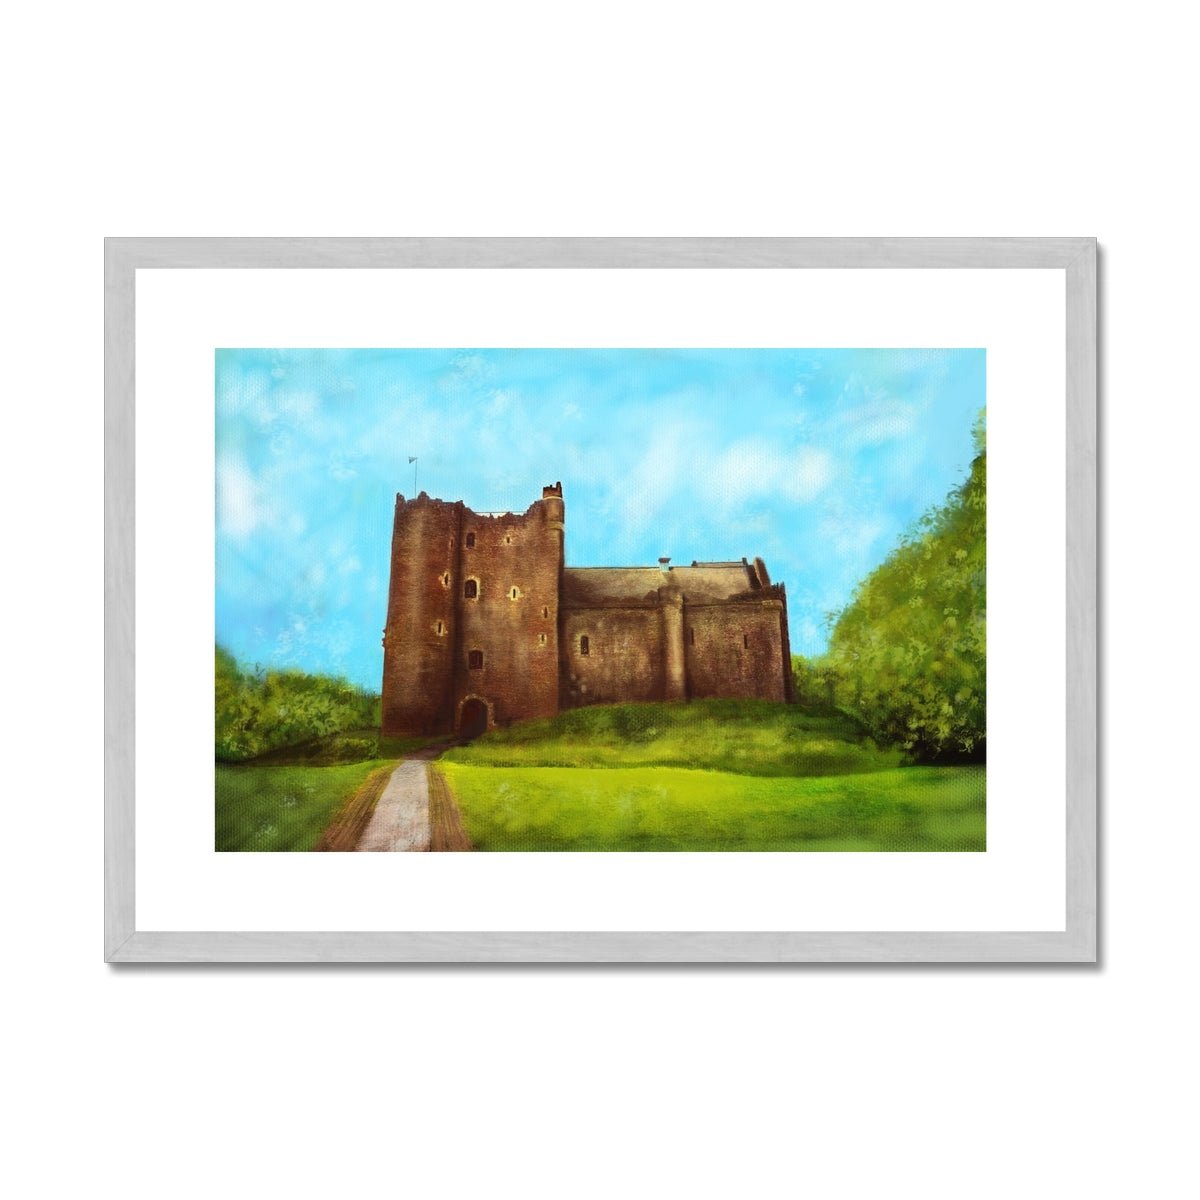 Doune Castle Painting | Antique Framed & Mounted Prints From Scotland-Antique Framed & Mounted Prints-Scottish Castles Art Gallery-A2 Landscape-Silver Frame-Paintings, Prints, Homeware, Art Gifts From Scotland By Scottish Artist Kevin Hunter